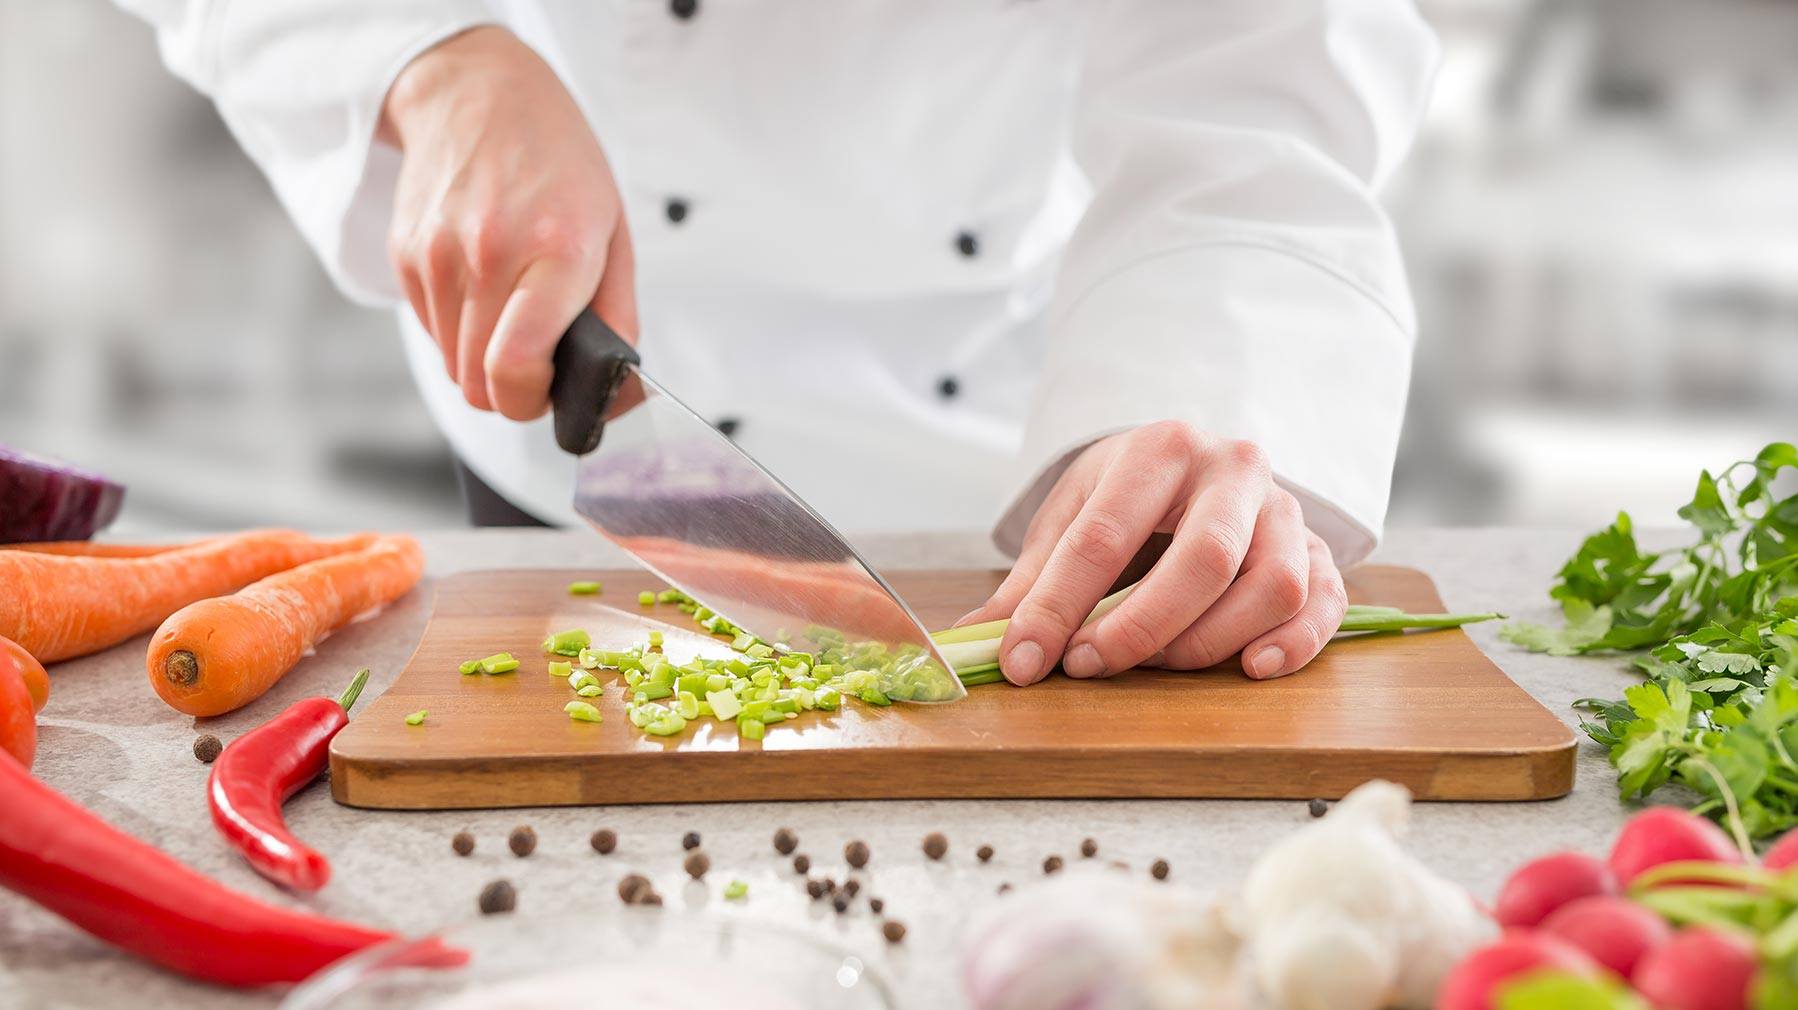 Professional Cookery and Food and Beverage Service - Level 2 | Hugh Baird College, Liverpool